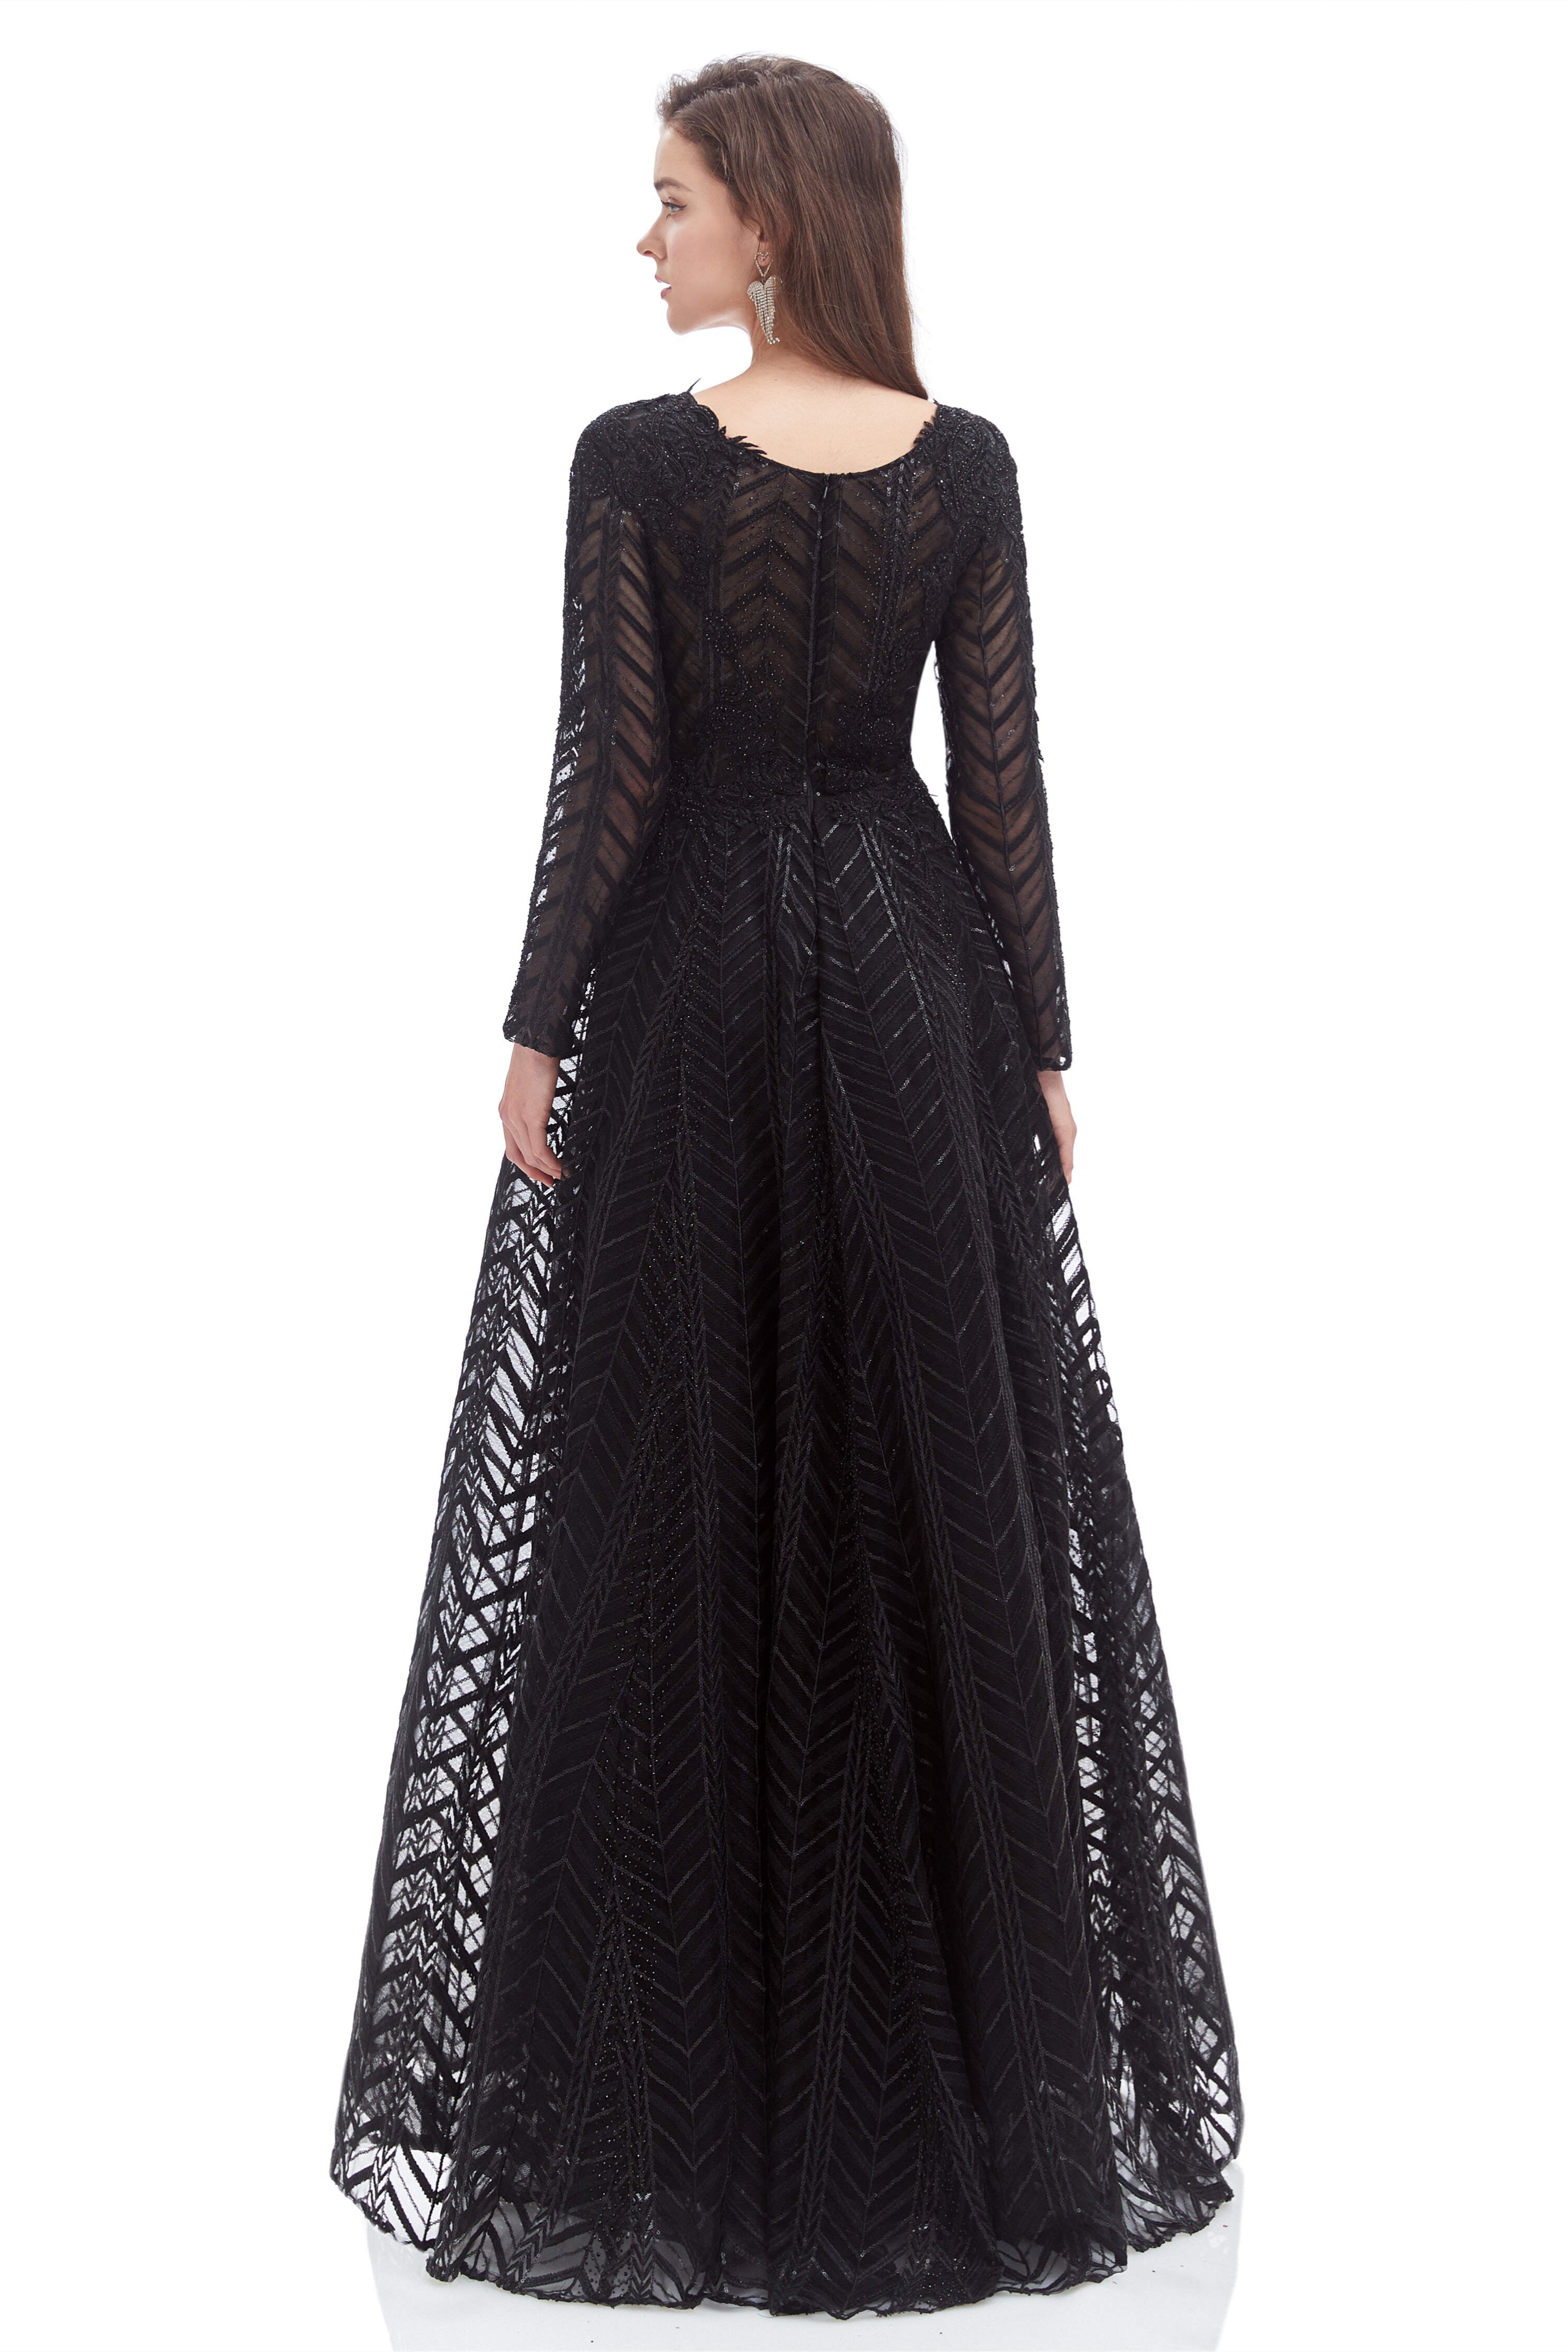 Party Dress Dress Code, A-Line V Neck Long Sleeves Lace Long Prom Dresses